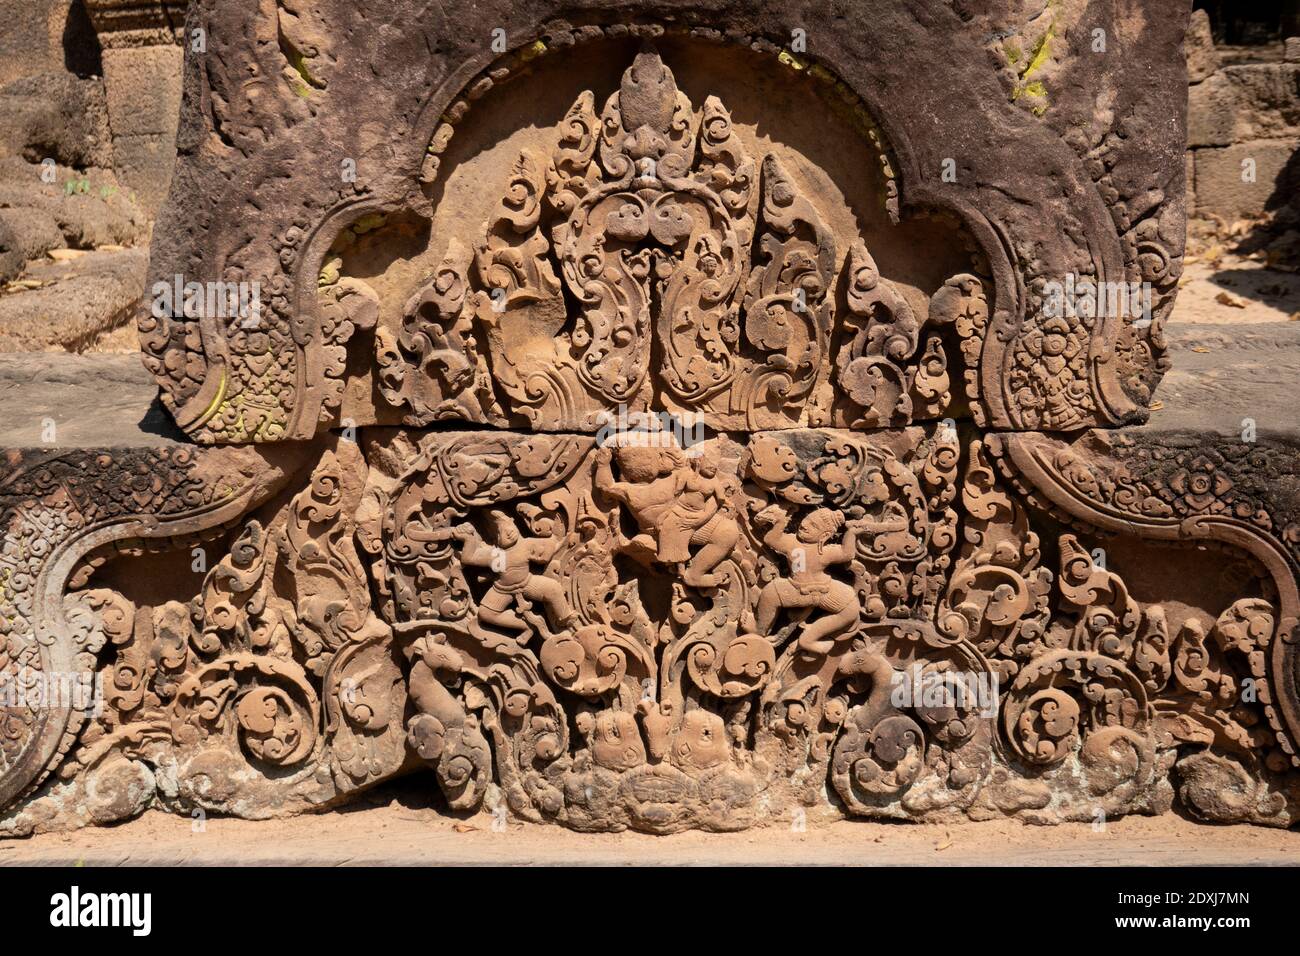 Bas-relief on the walls of Banteay Srei Stock Photo